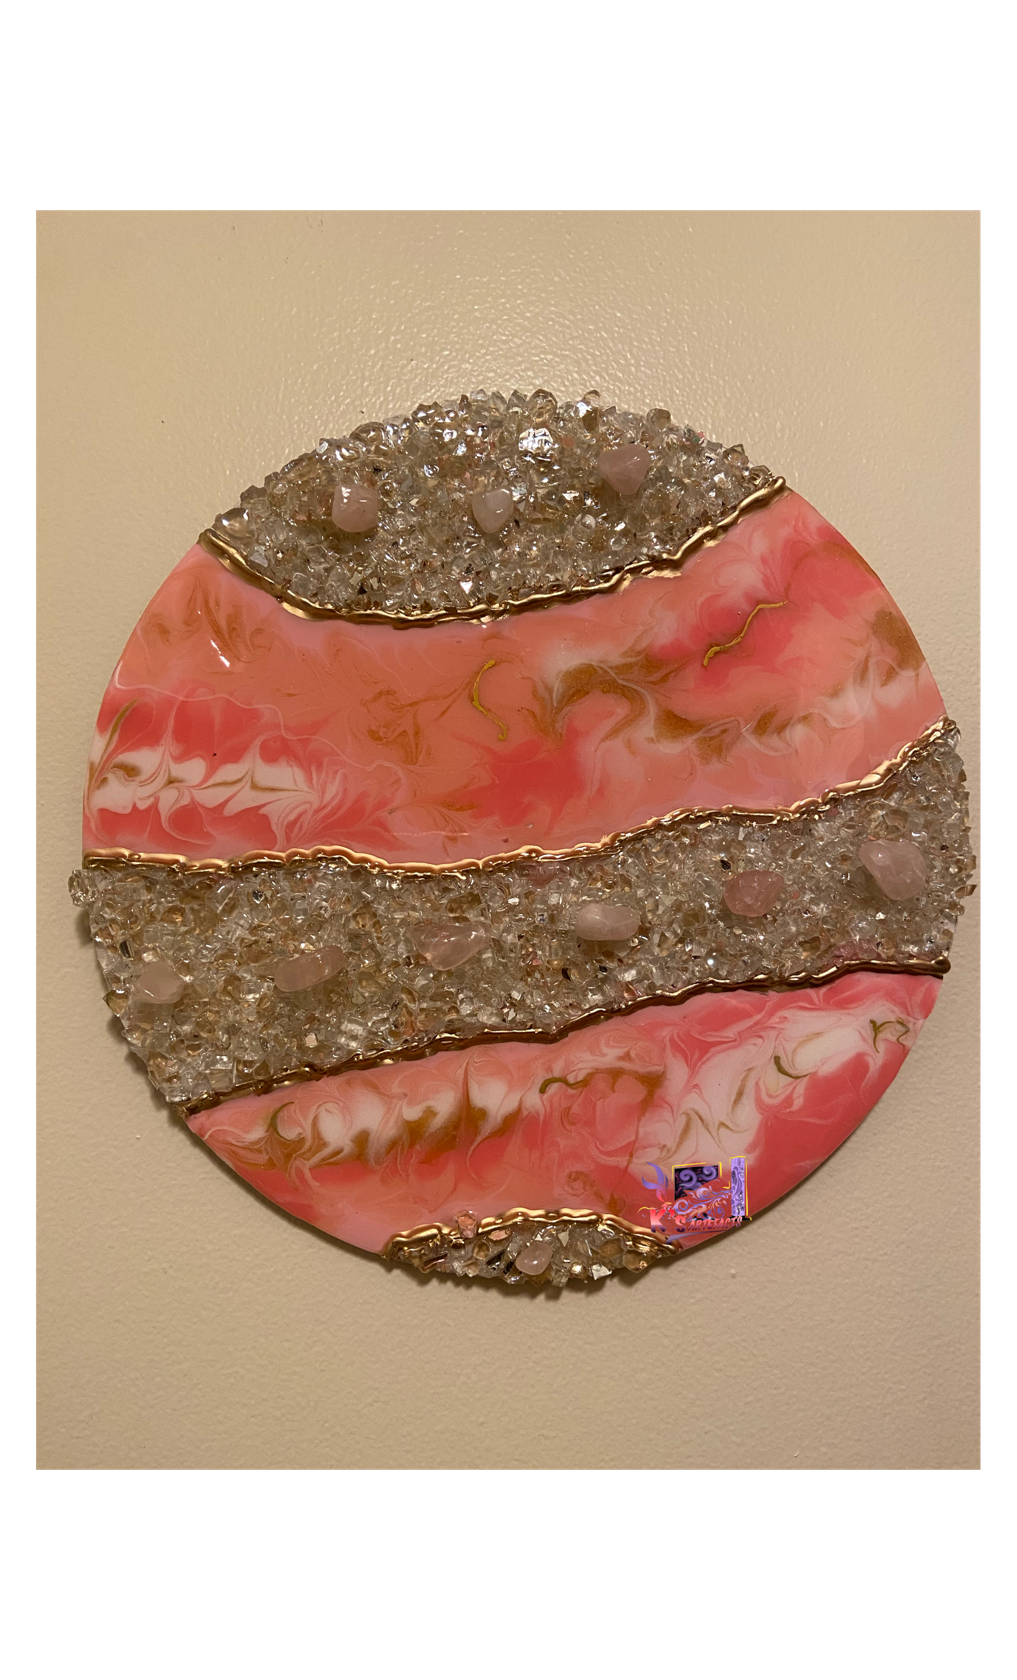 The Escape “Realm” - Wall Art Geode